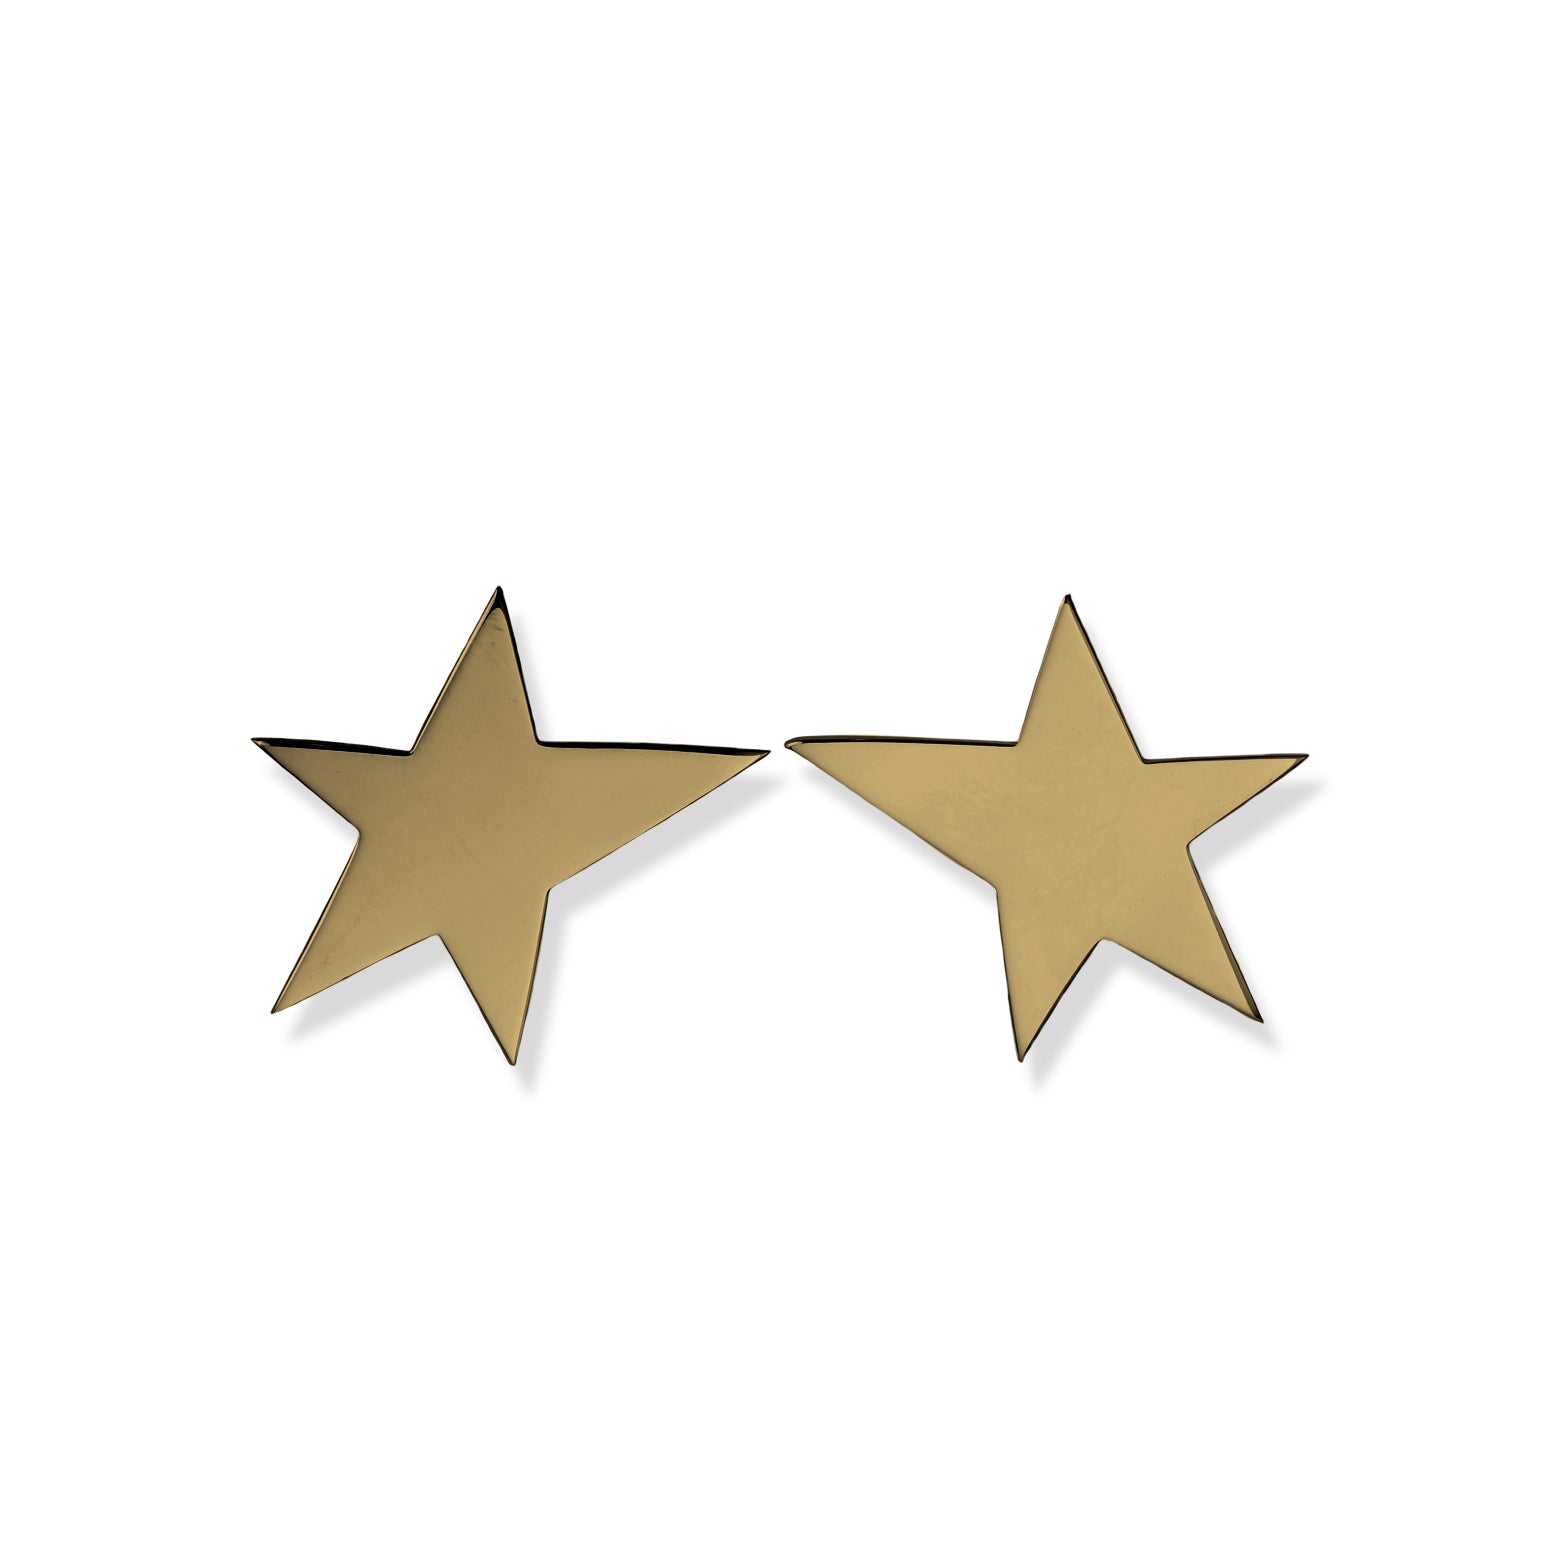 Kelly Woodcroft yellow gold star shaped earrings are made in Brisbane.